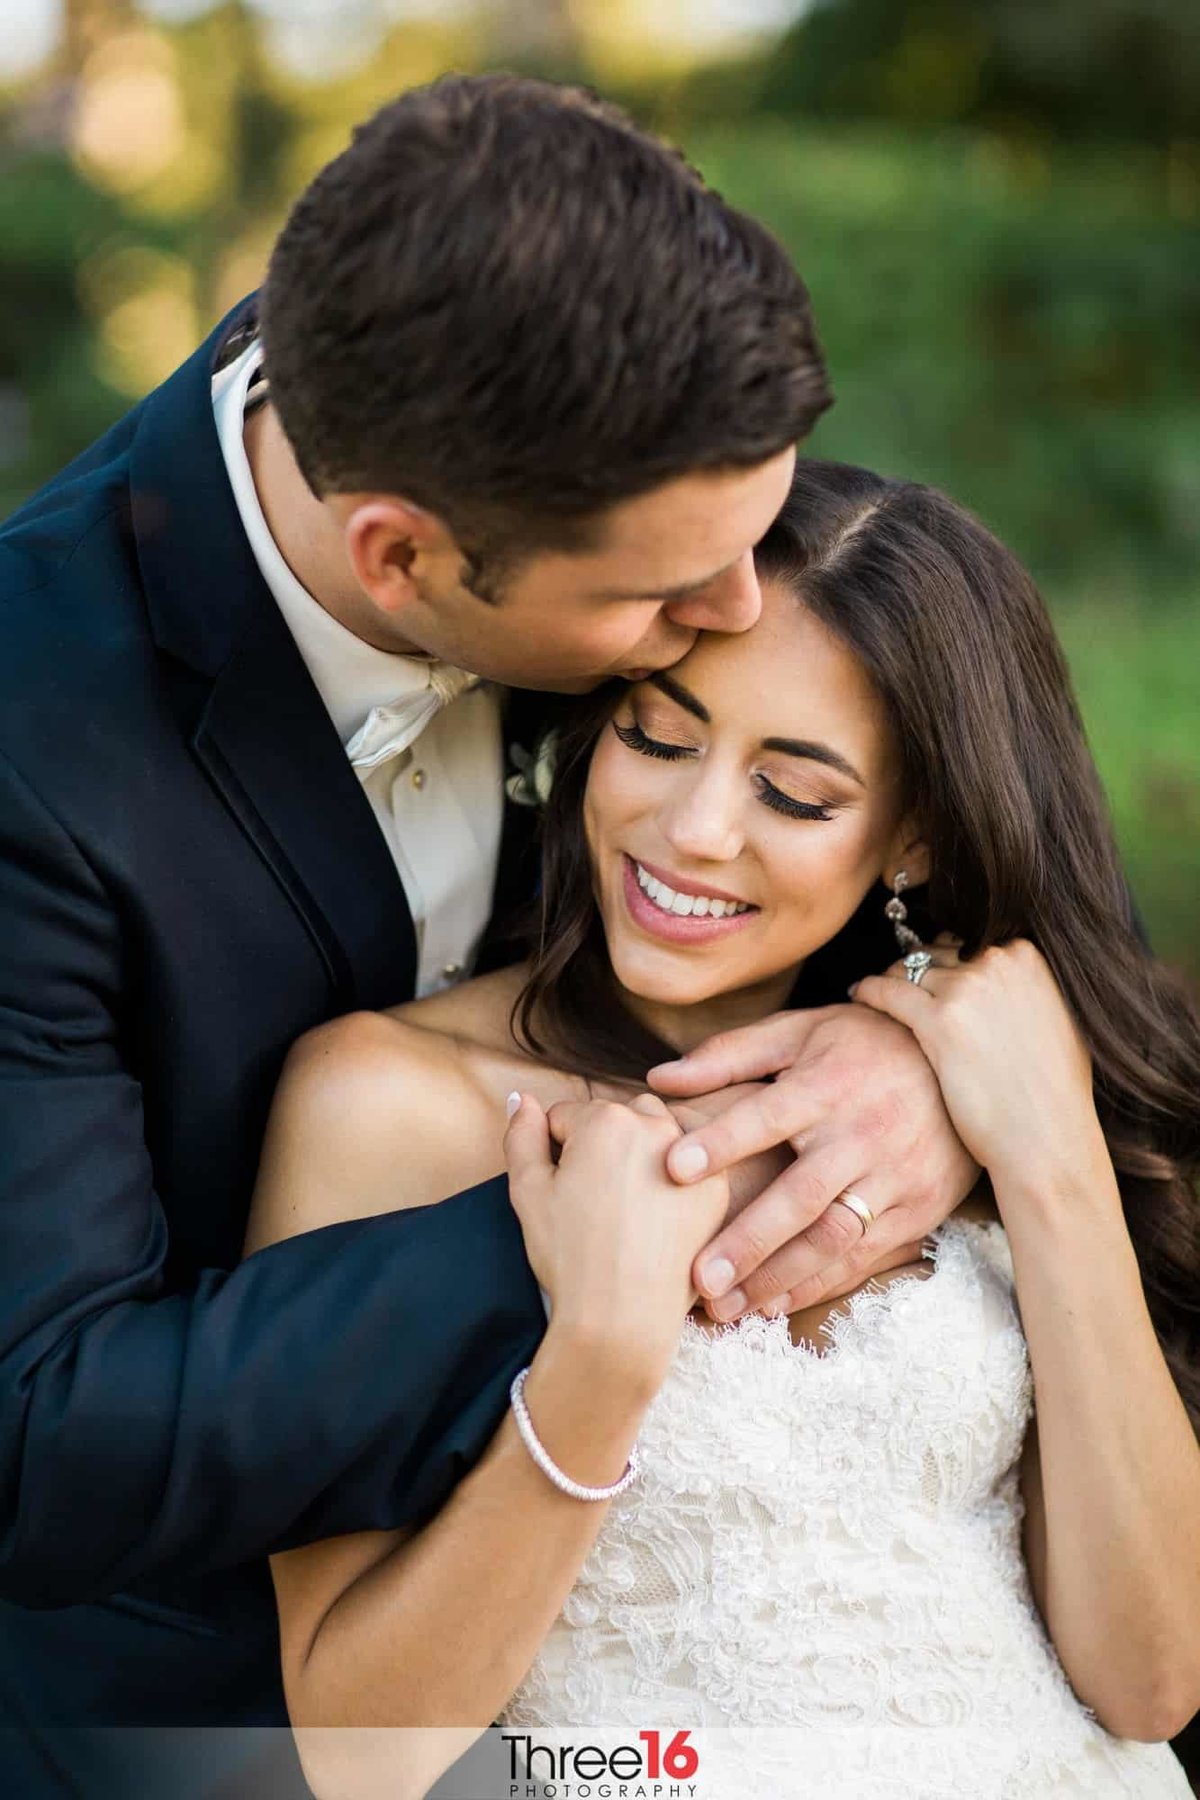 Groom fully embraces his Bride from behind and kisses her forehead leaving the Bride with a huge smile on her face